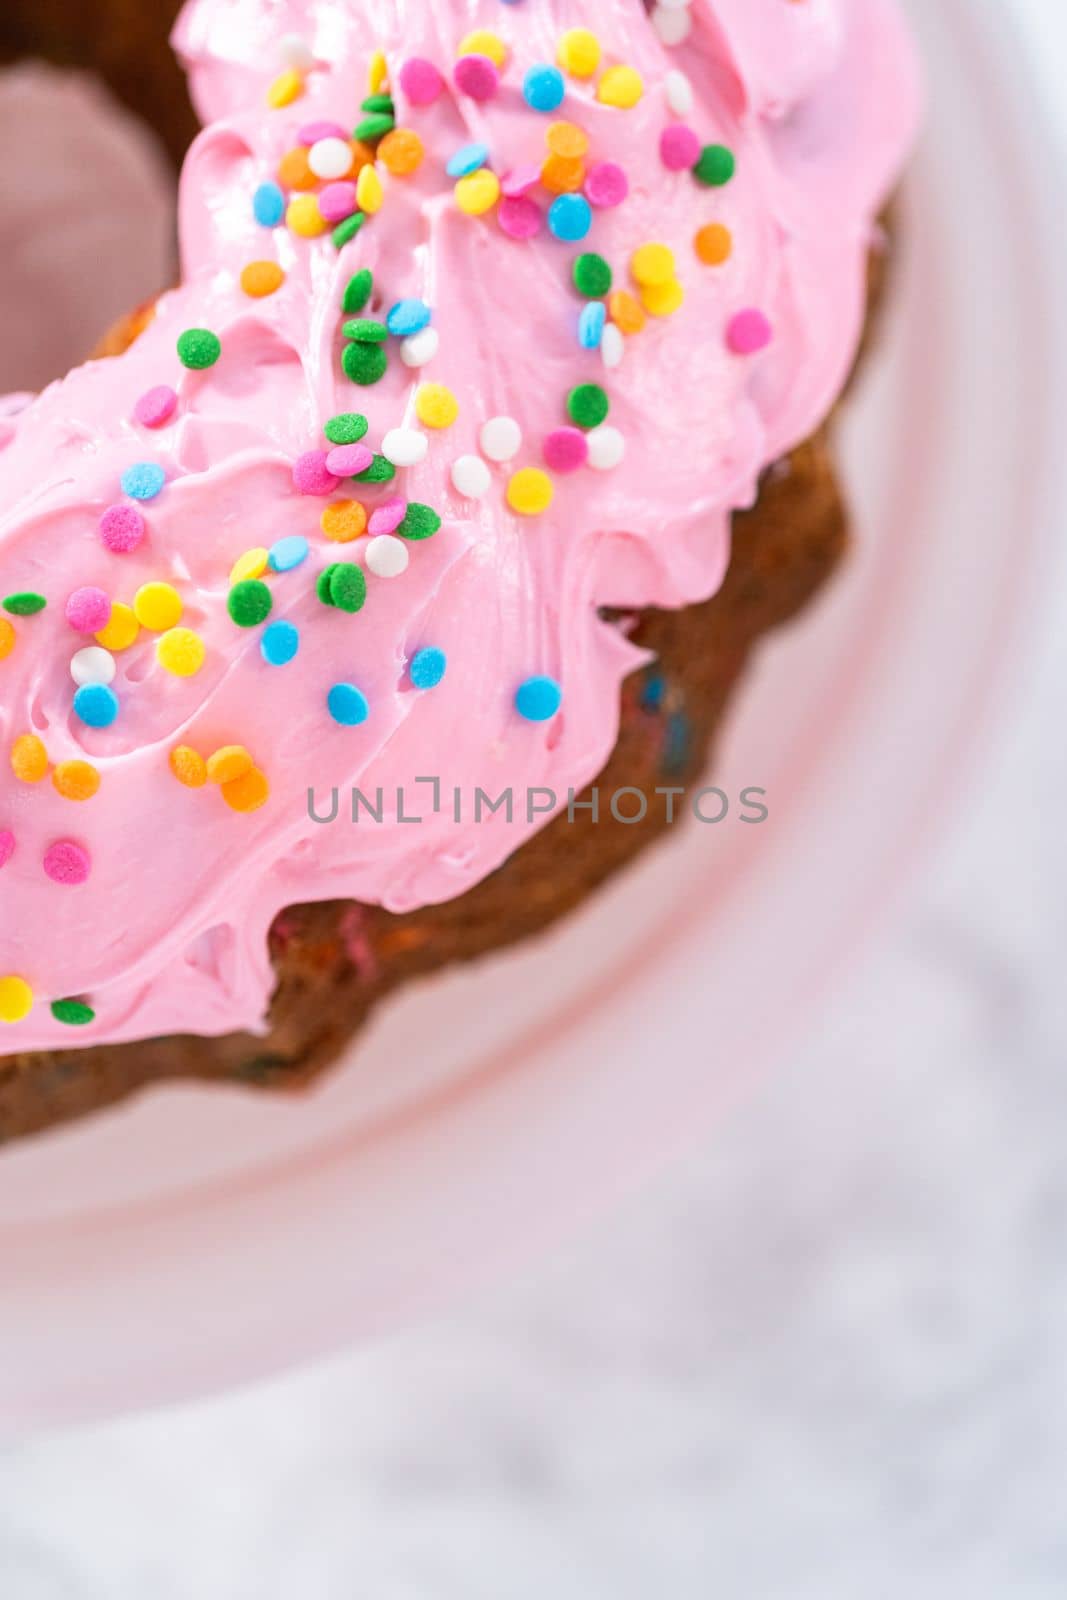 Funfettti bundt cake frosted with pink vanilla buttercream frosting and decorated with rainbow sprinkles.